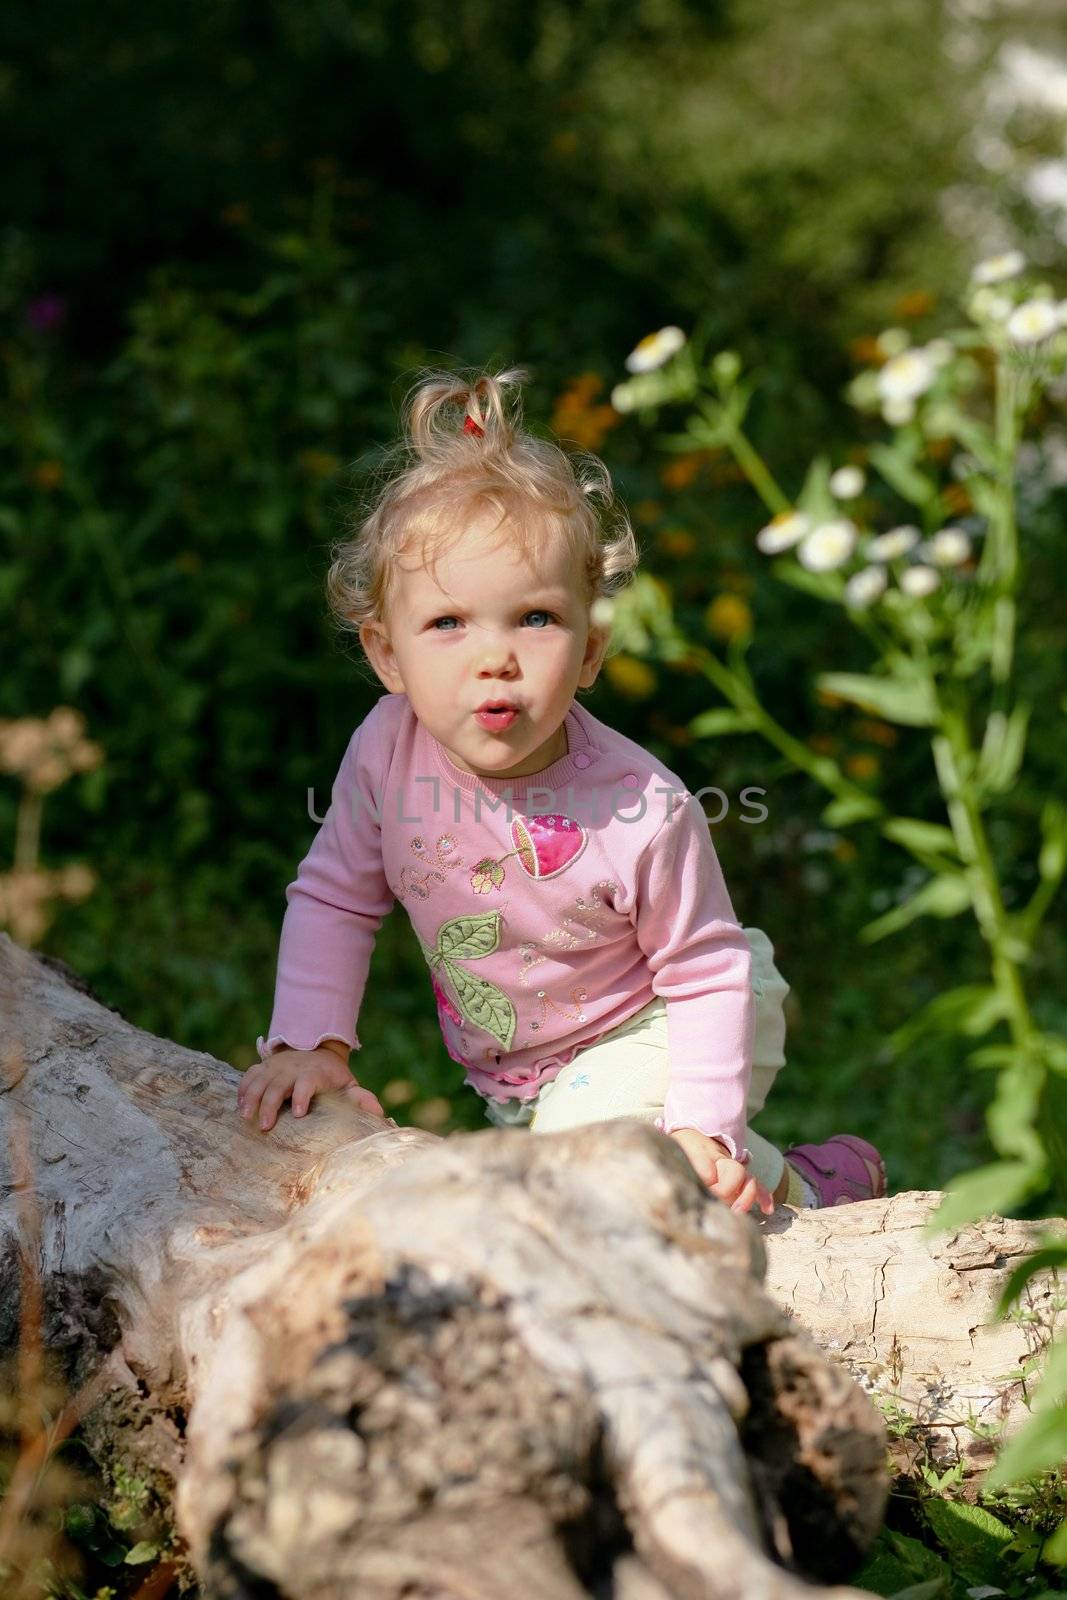 An image of little girl playing outdoor